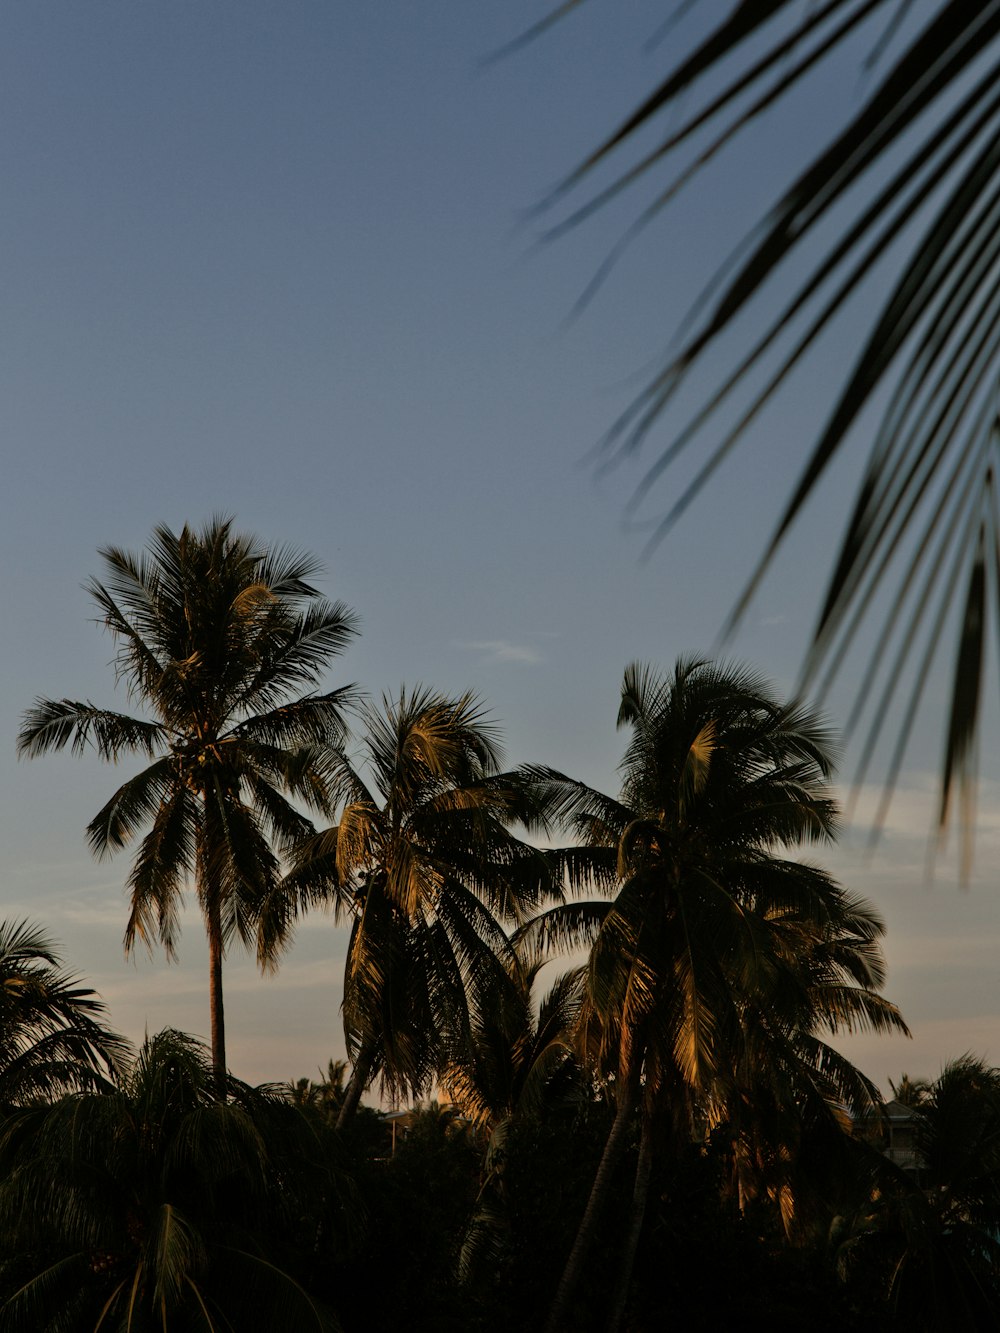 a plane is flying over some palm trees